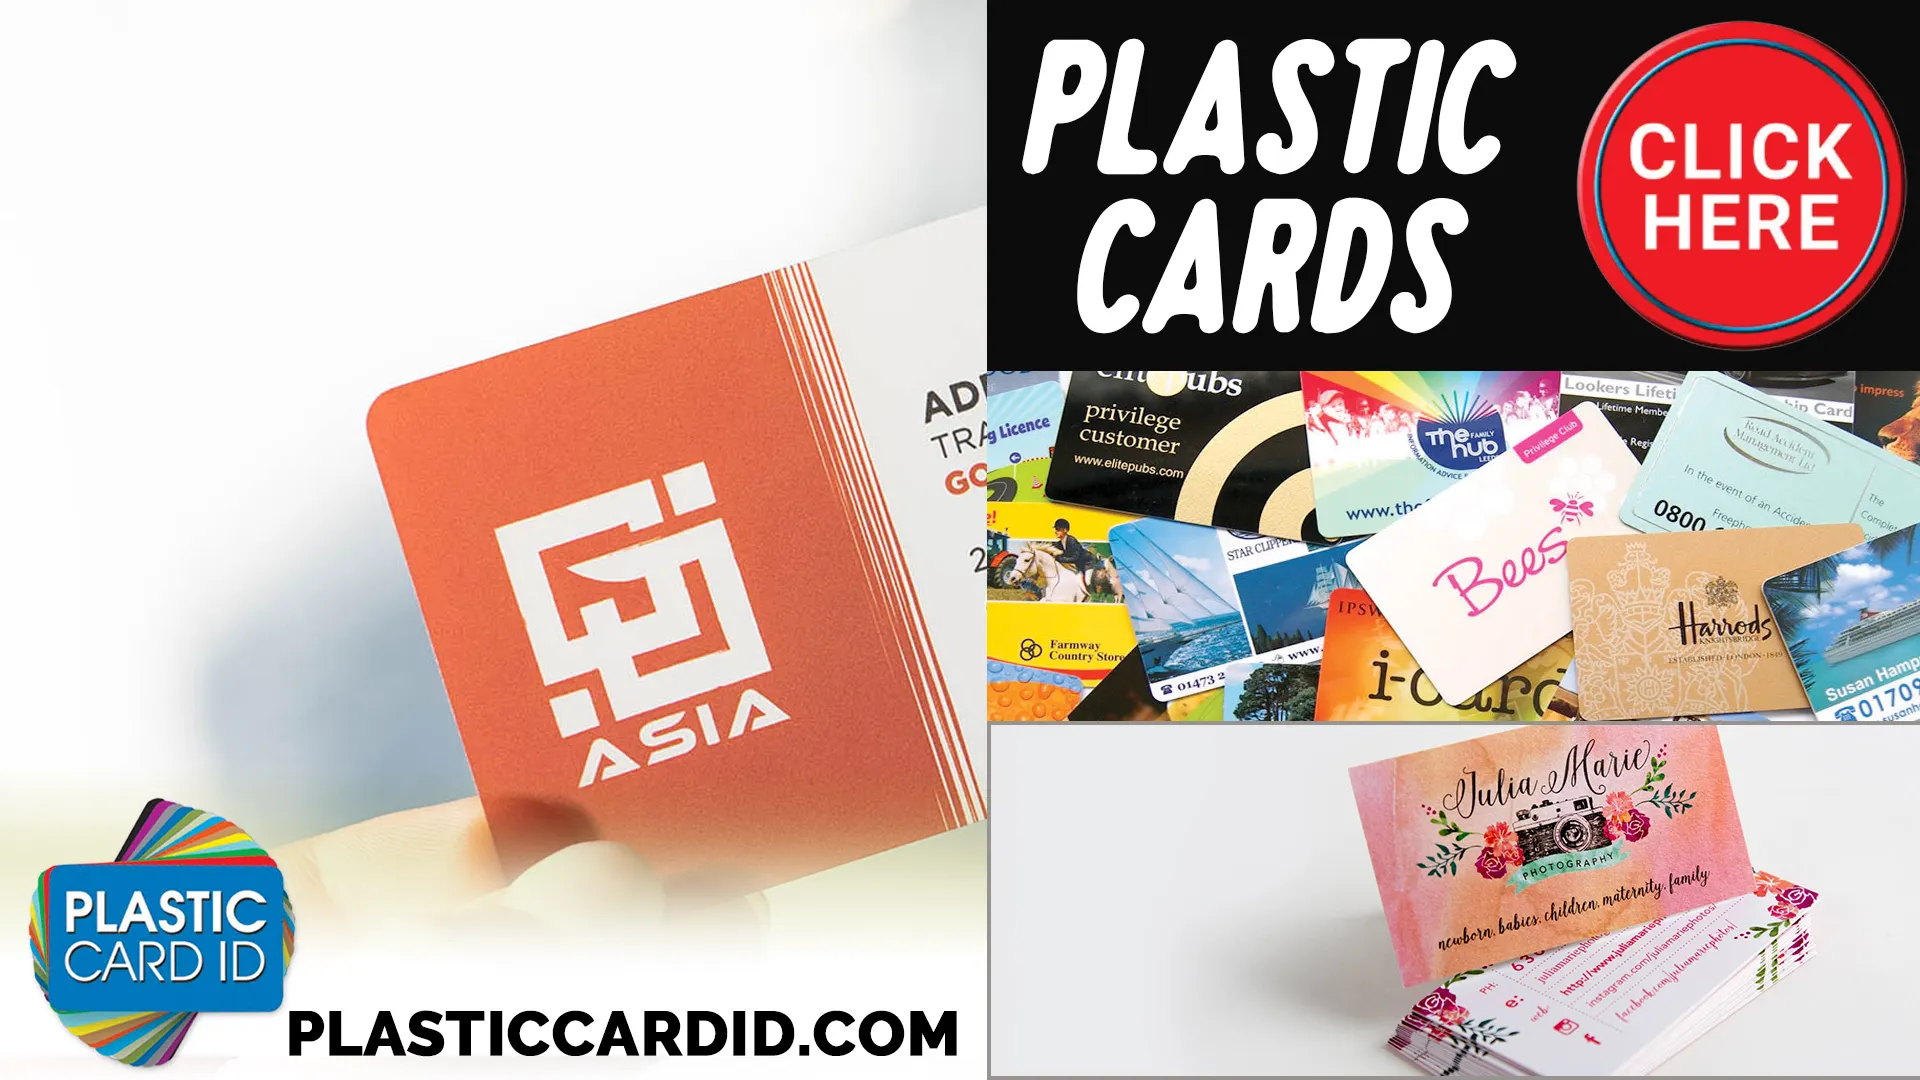 The Integration of Aesthetics and Security in Plastic Cards